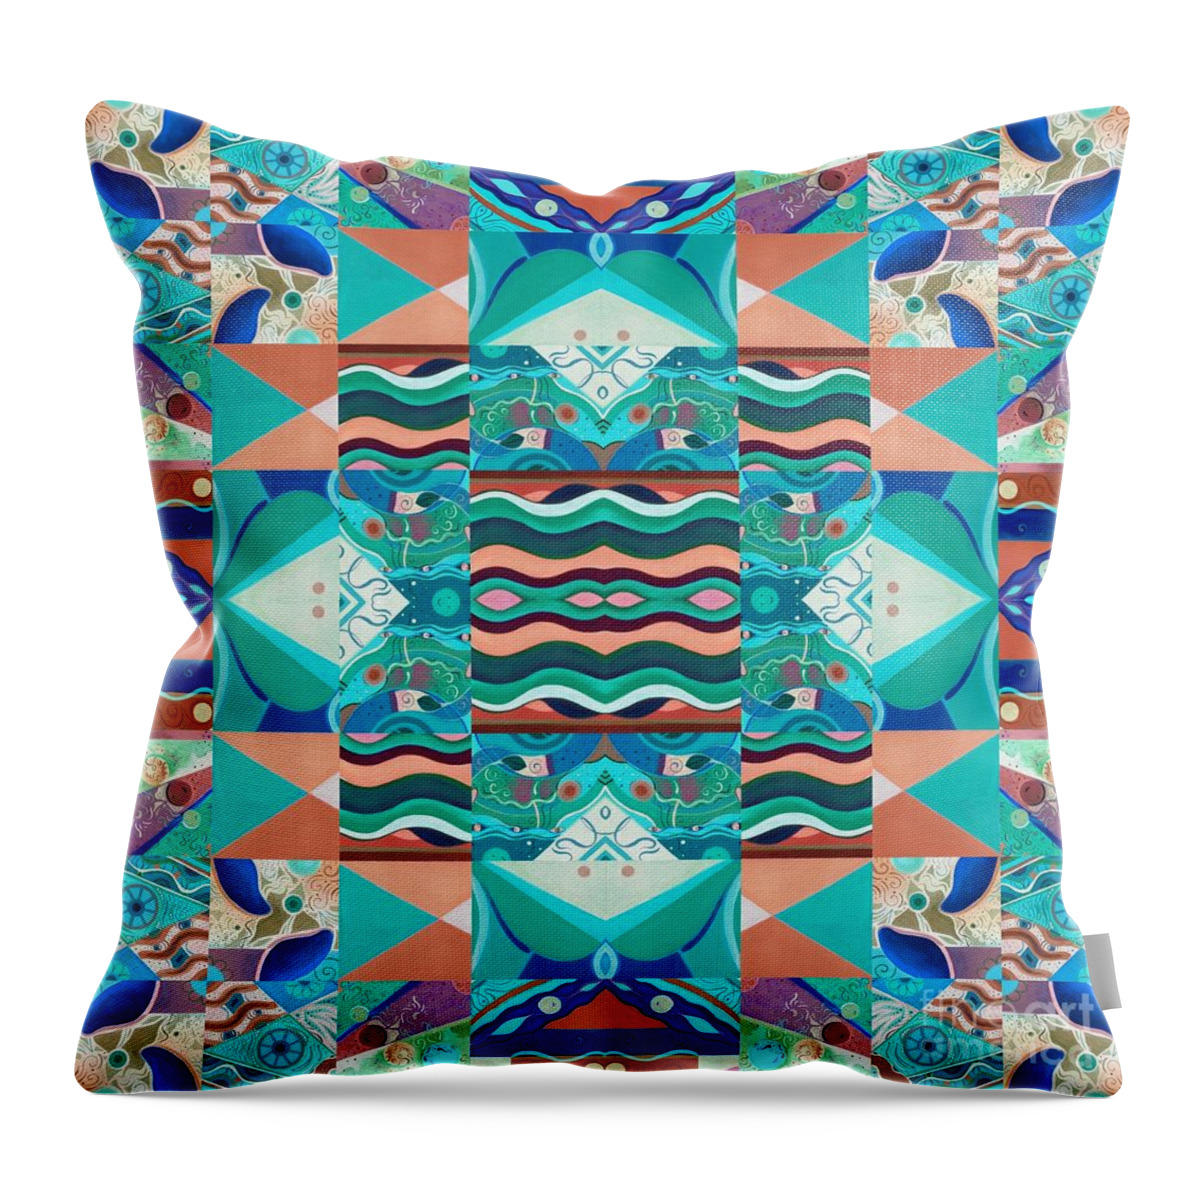 The Joy Of Design Mandala Series Puzzle 8 Arrangement 6 Inverted By Helena Tiainen Throw Pillow featuring the painting The Joy of Design Mandala Series Puzzle 8 Arrangement 6 Inverted by Helena Tiainen